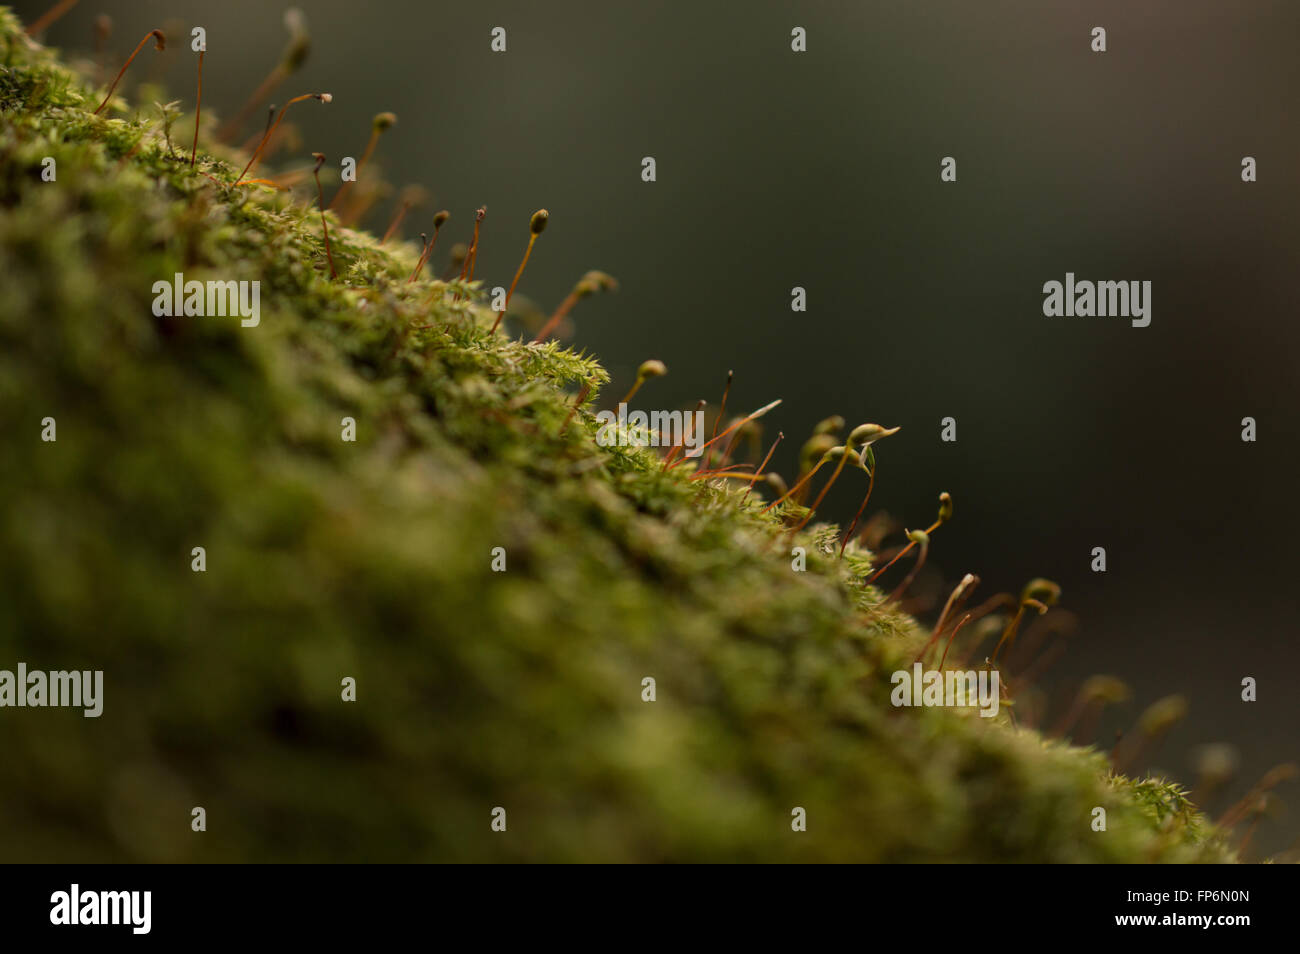 A close-up of Rough-stalked Feather-moss (Brachythecium rutabulum) growing on a tree bark. Stock Photo